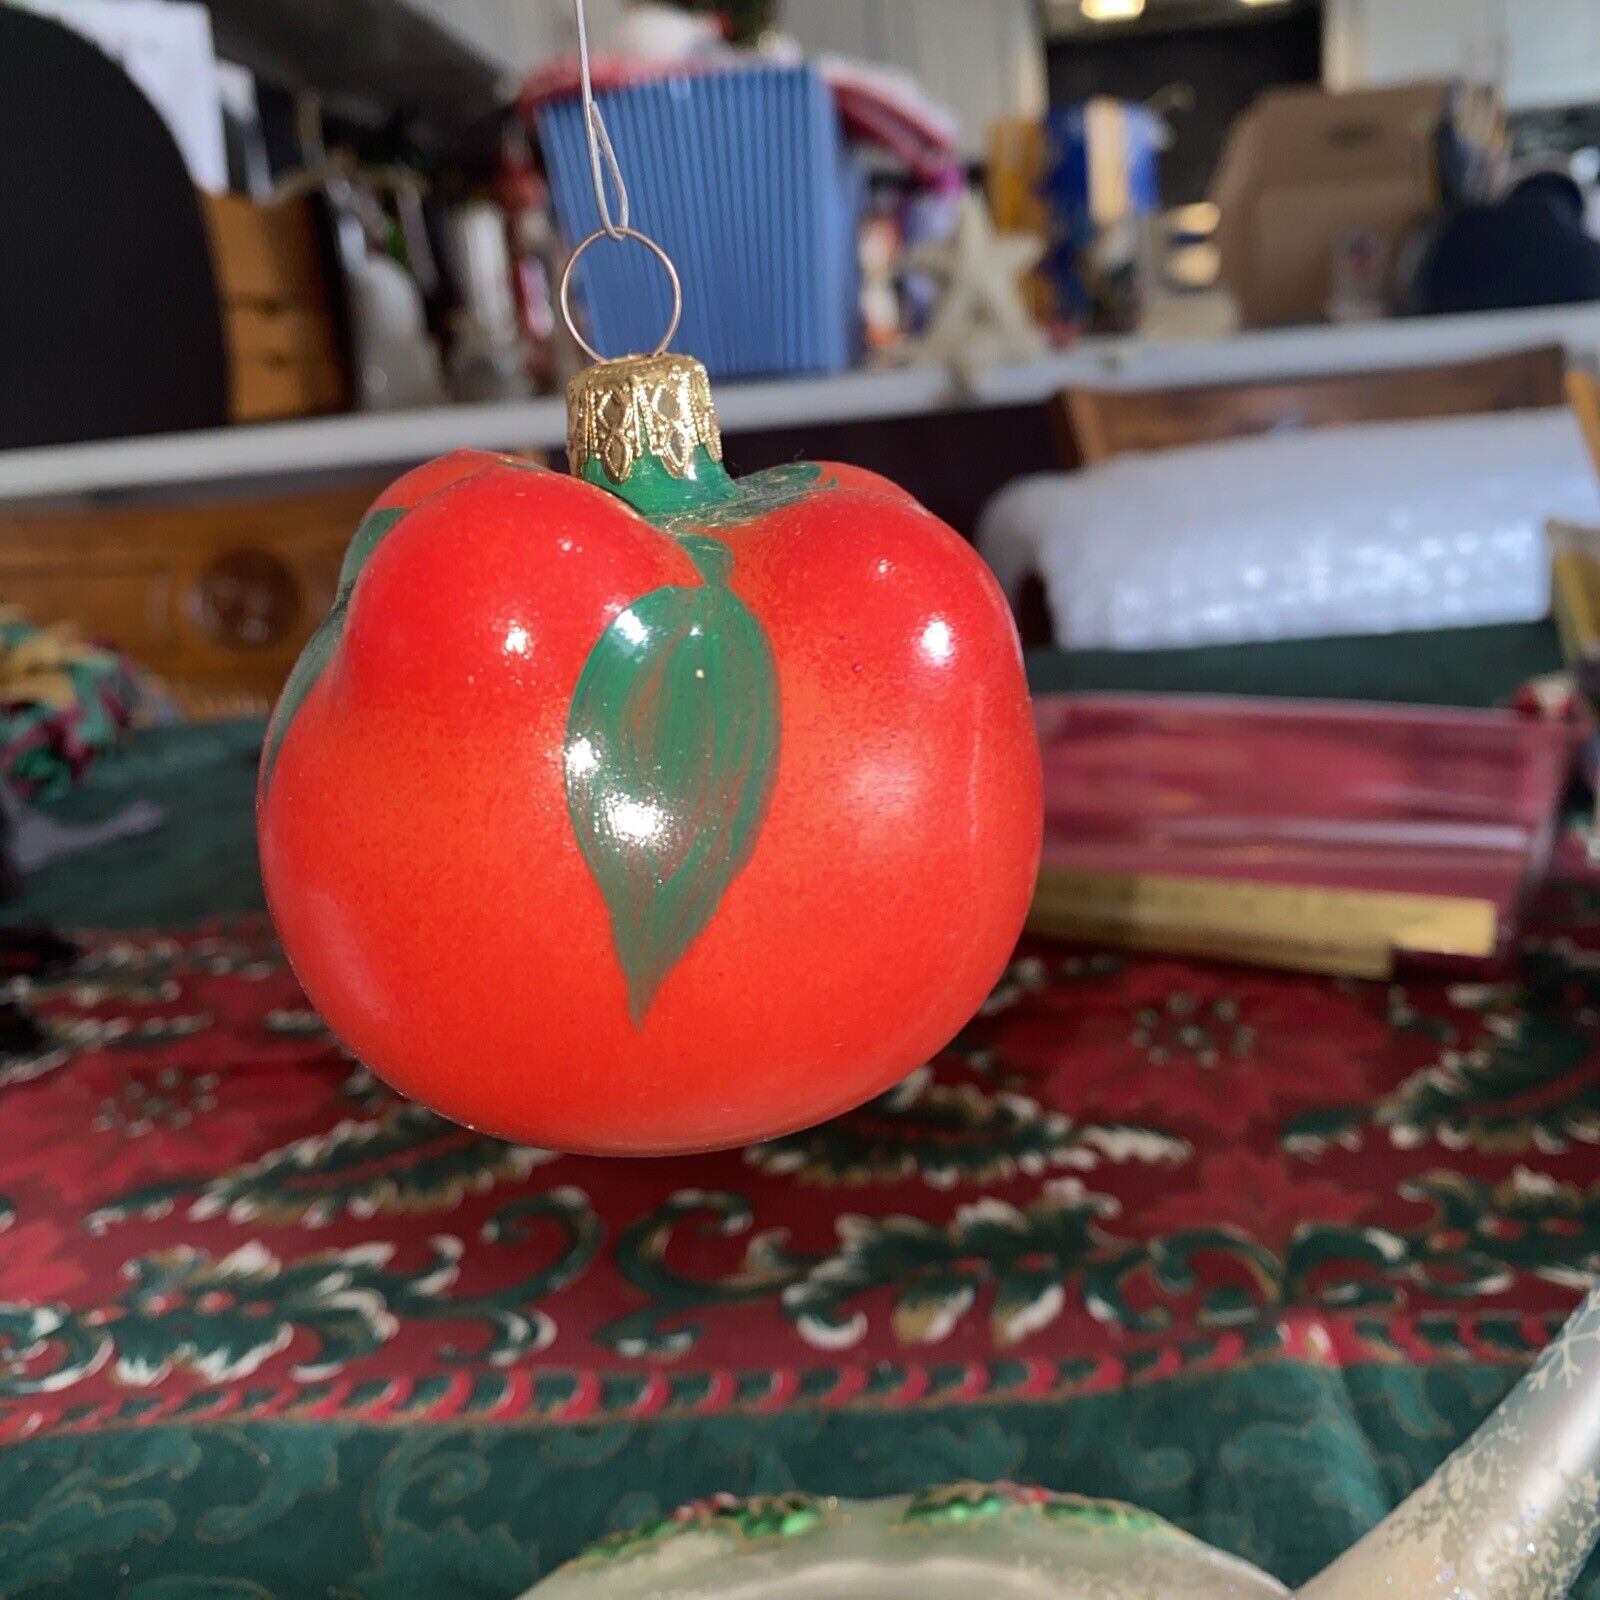 Red Tomato. German Glass Ornament. Yes, of course, fruit for Tree